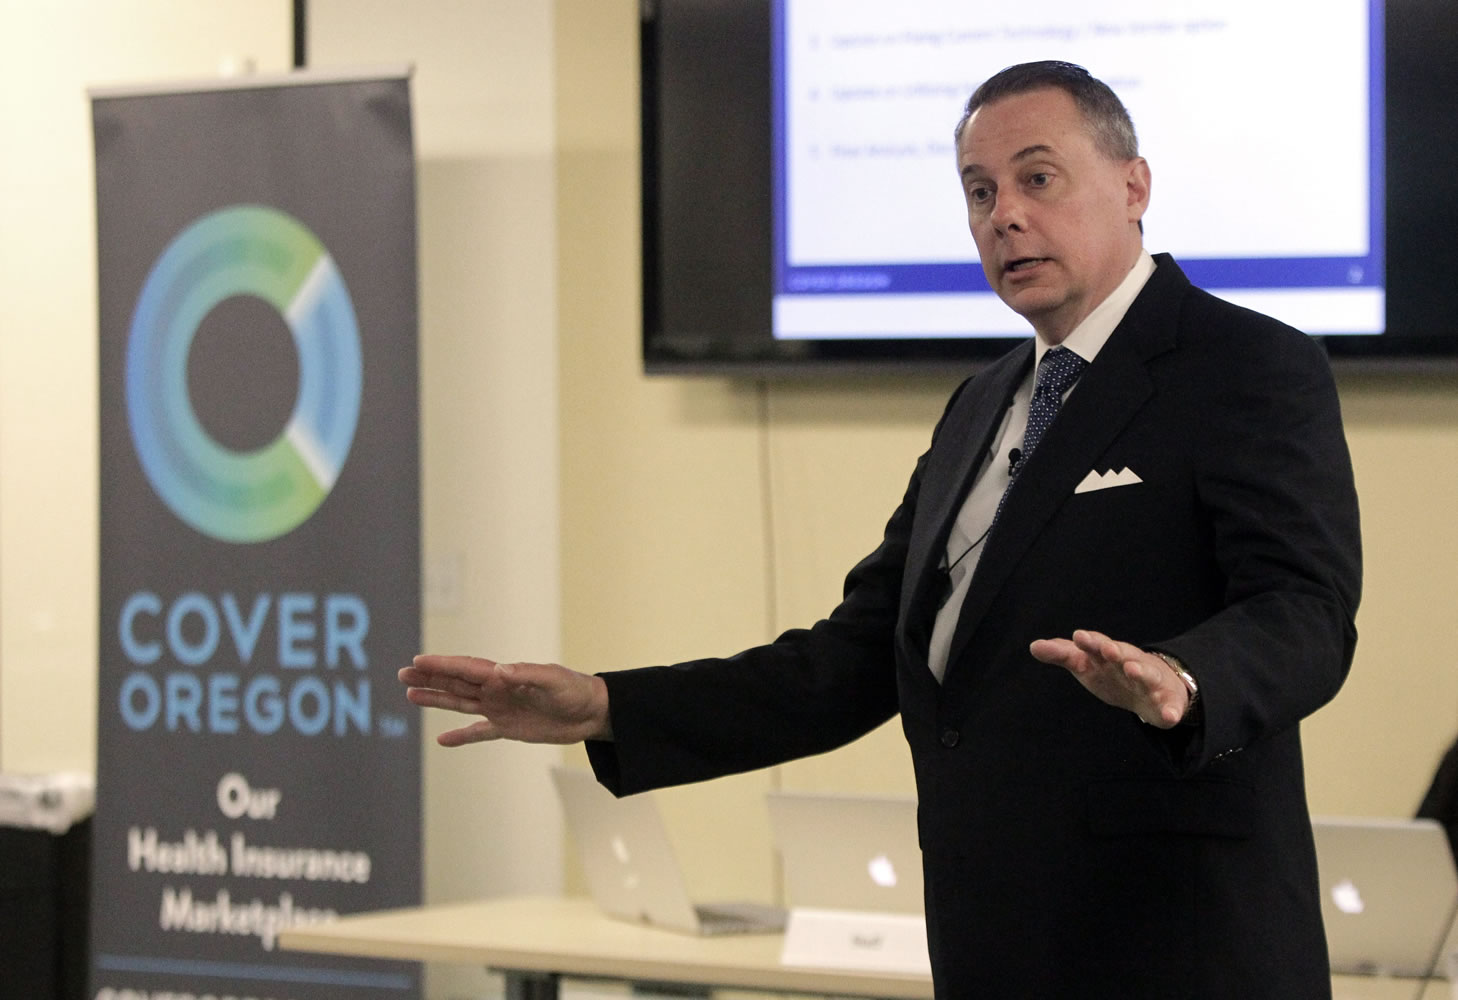 At an advisory meeting Thursday in Portland, Alex Pettit of Cover Oregon says switching to the federal system would cost $4 million to $6 million.